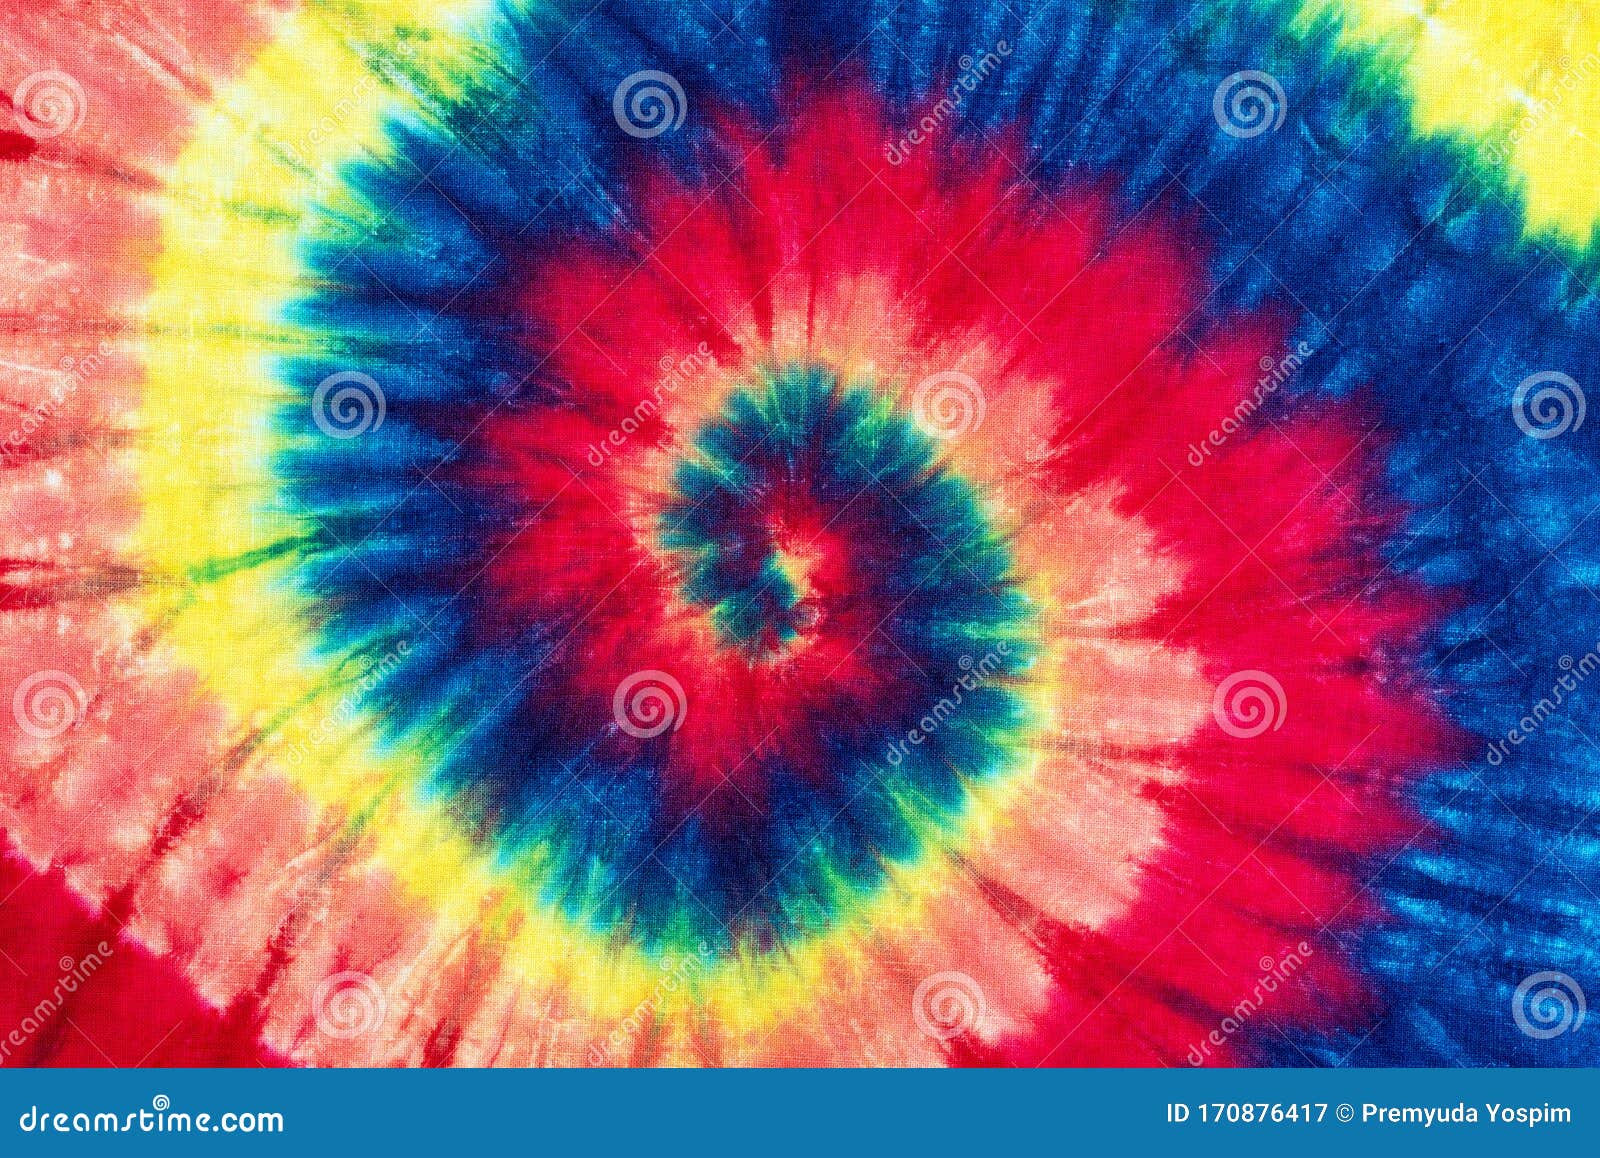 Spiral Tie  Dye  Pattern  Abstract Background Stock Image 